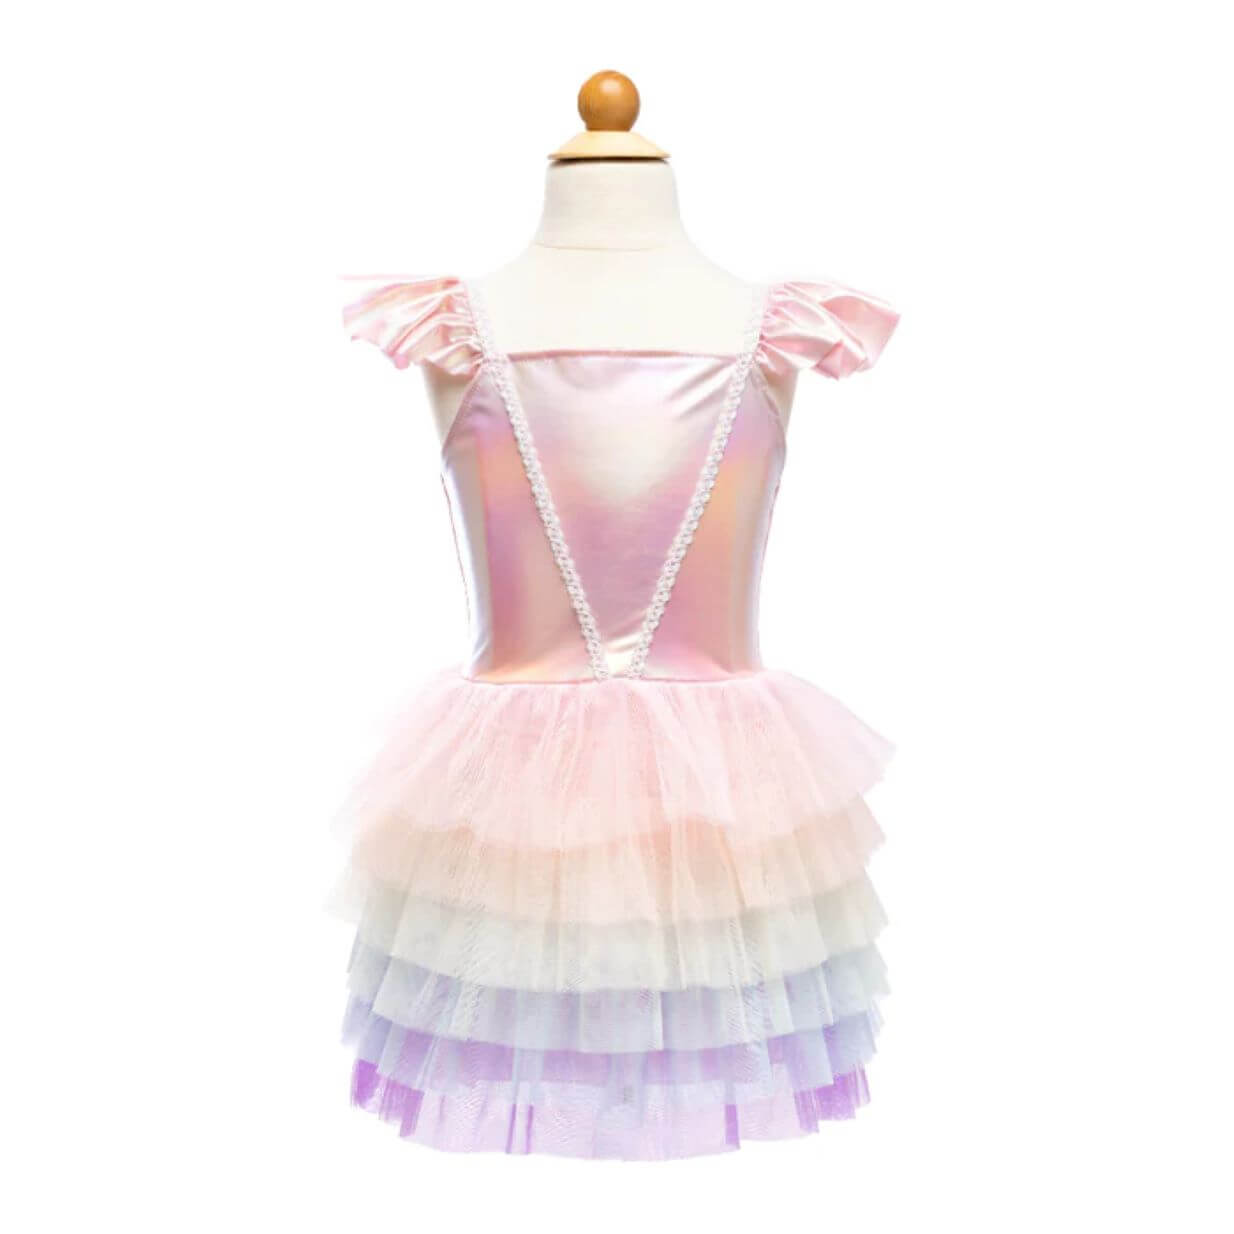 Girls dress with pink bodice top and layered tutu skirt in pastel rainbow colours